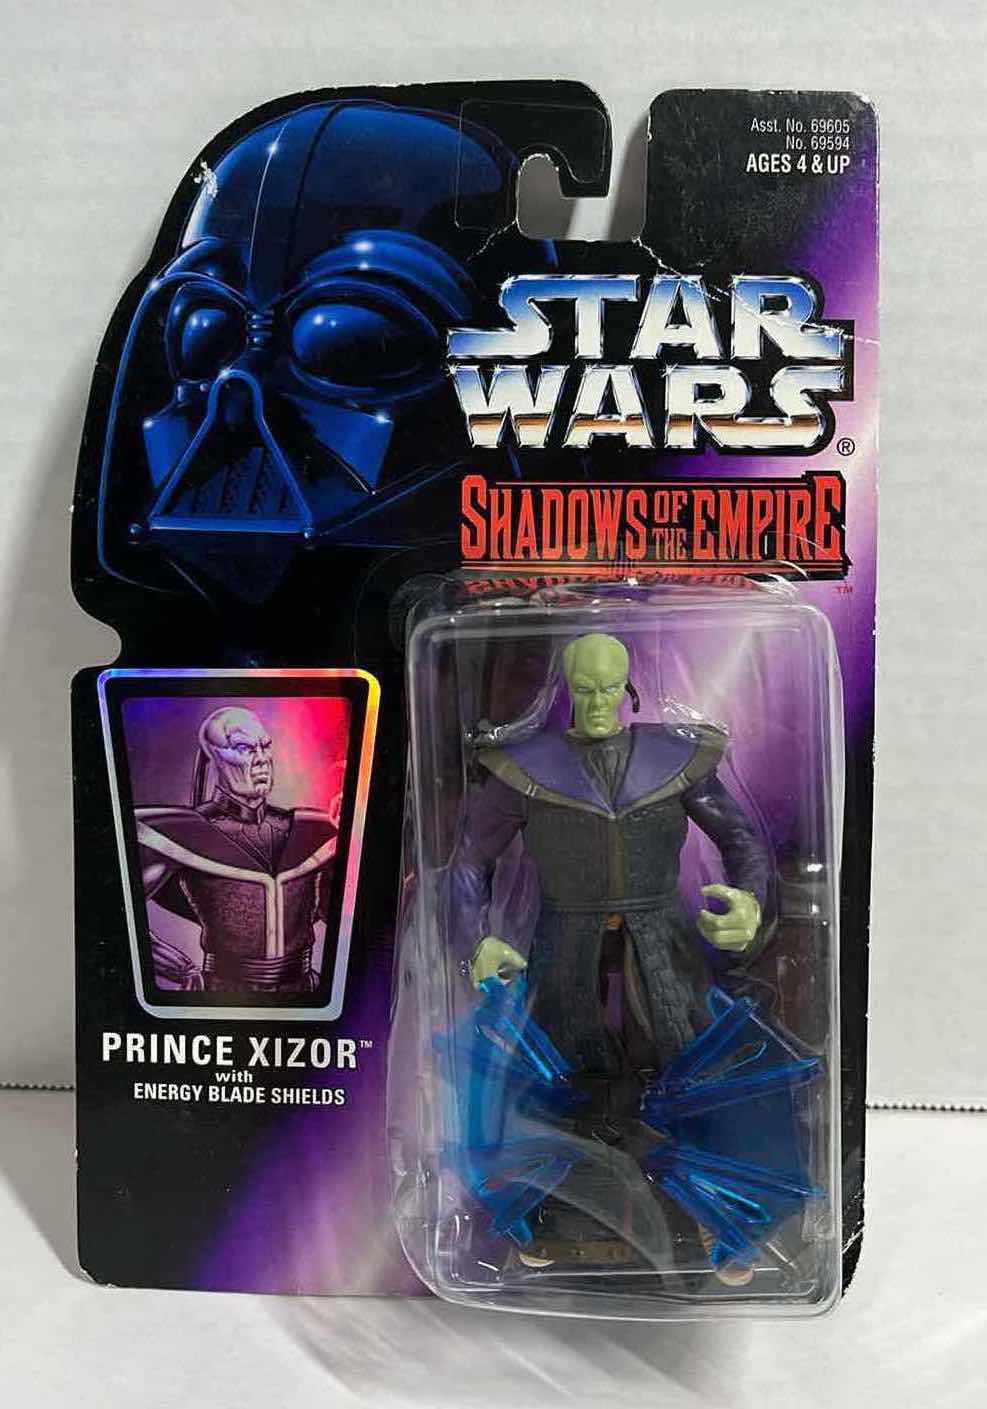 Photo 1 of NEW STAR WARS SHADOWS OF THE EMPIRE ACTION FIGURE, PRINCE XIZOR